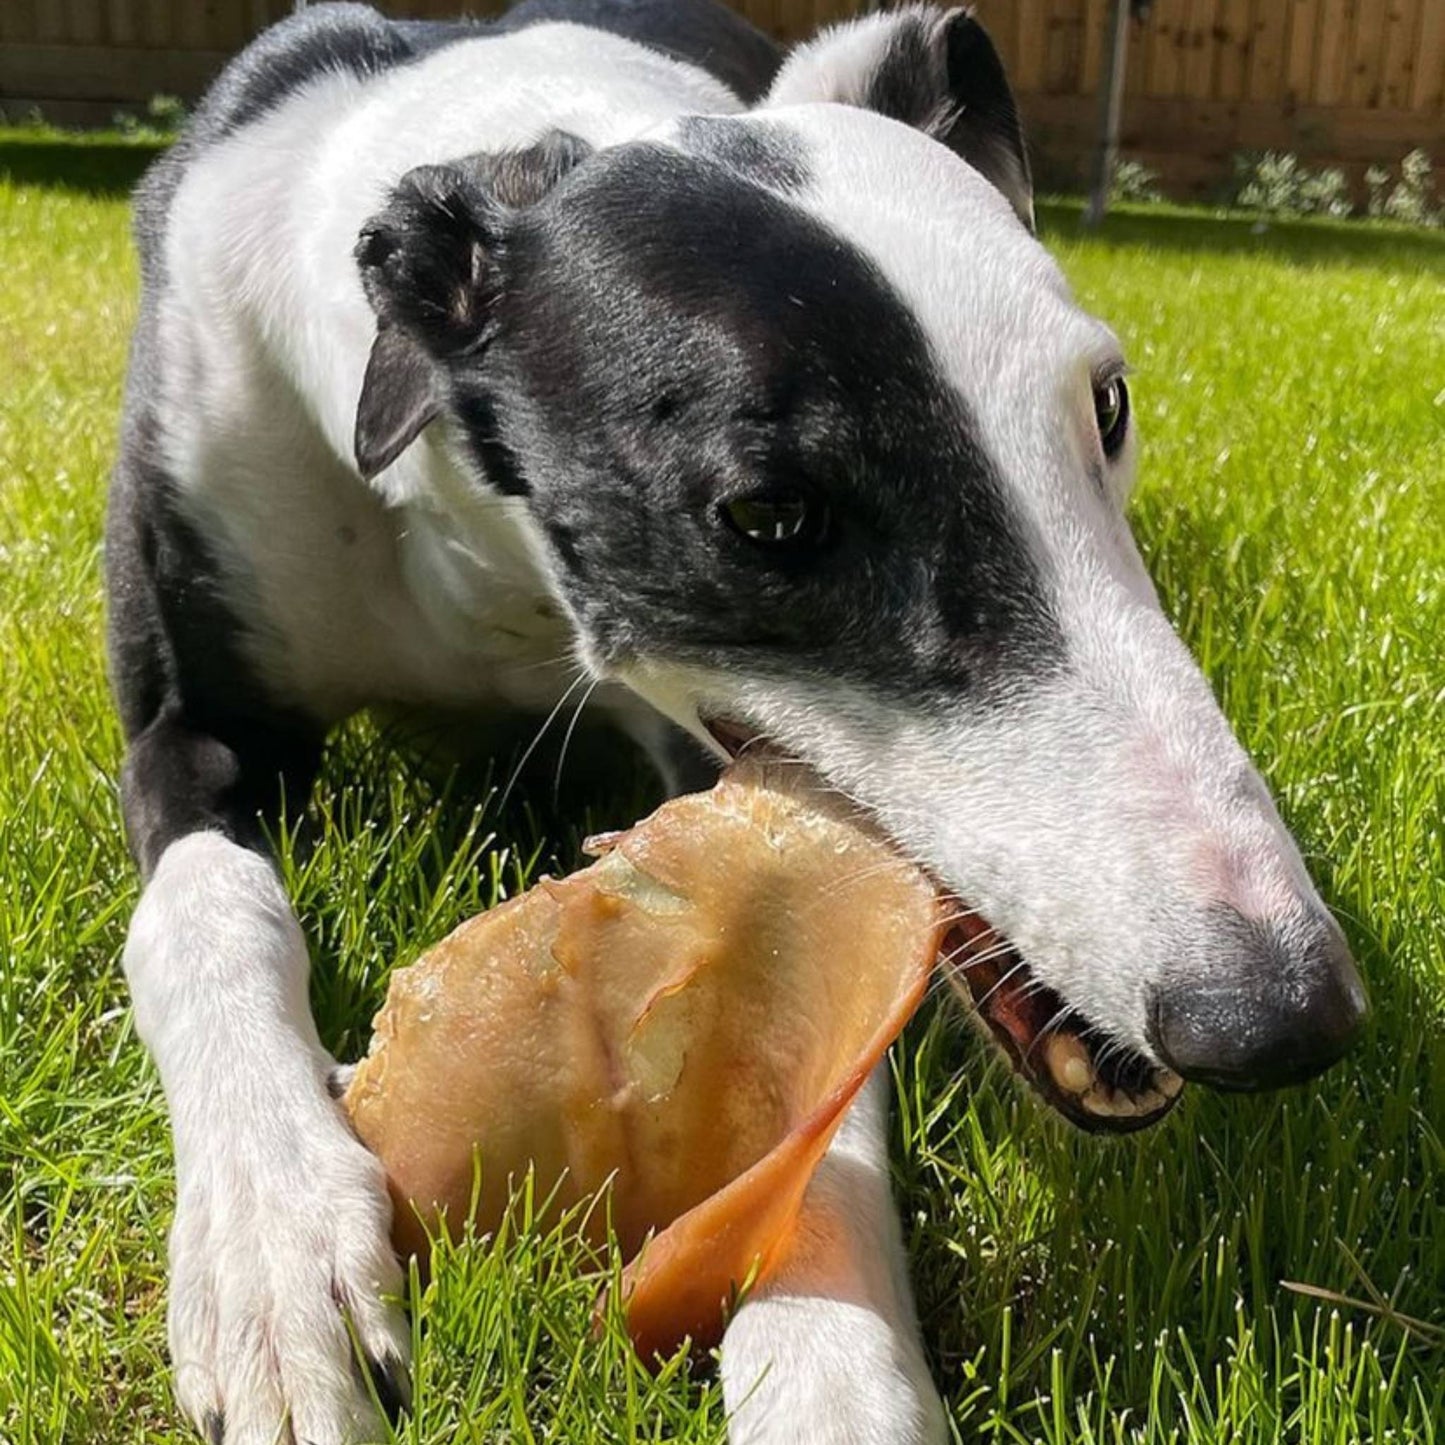 Dog chewing on a pig ear treat